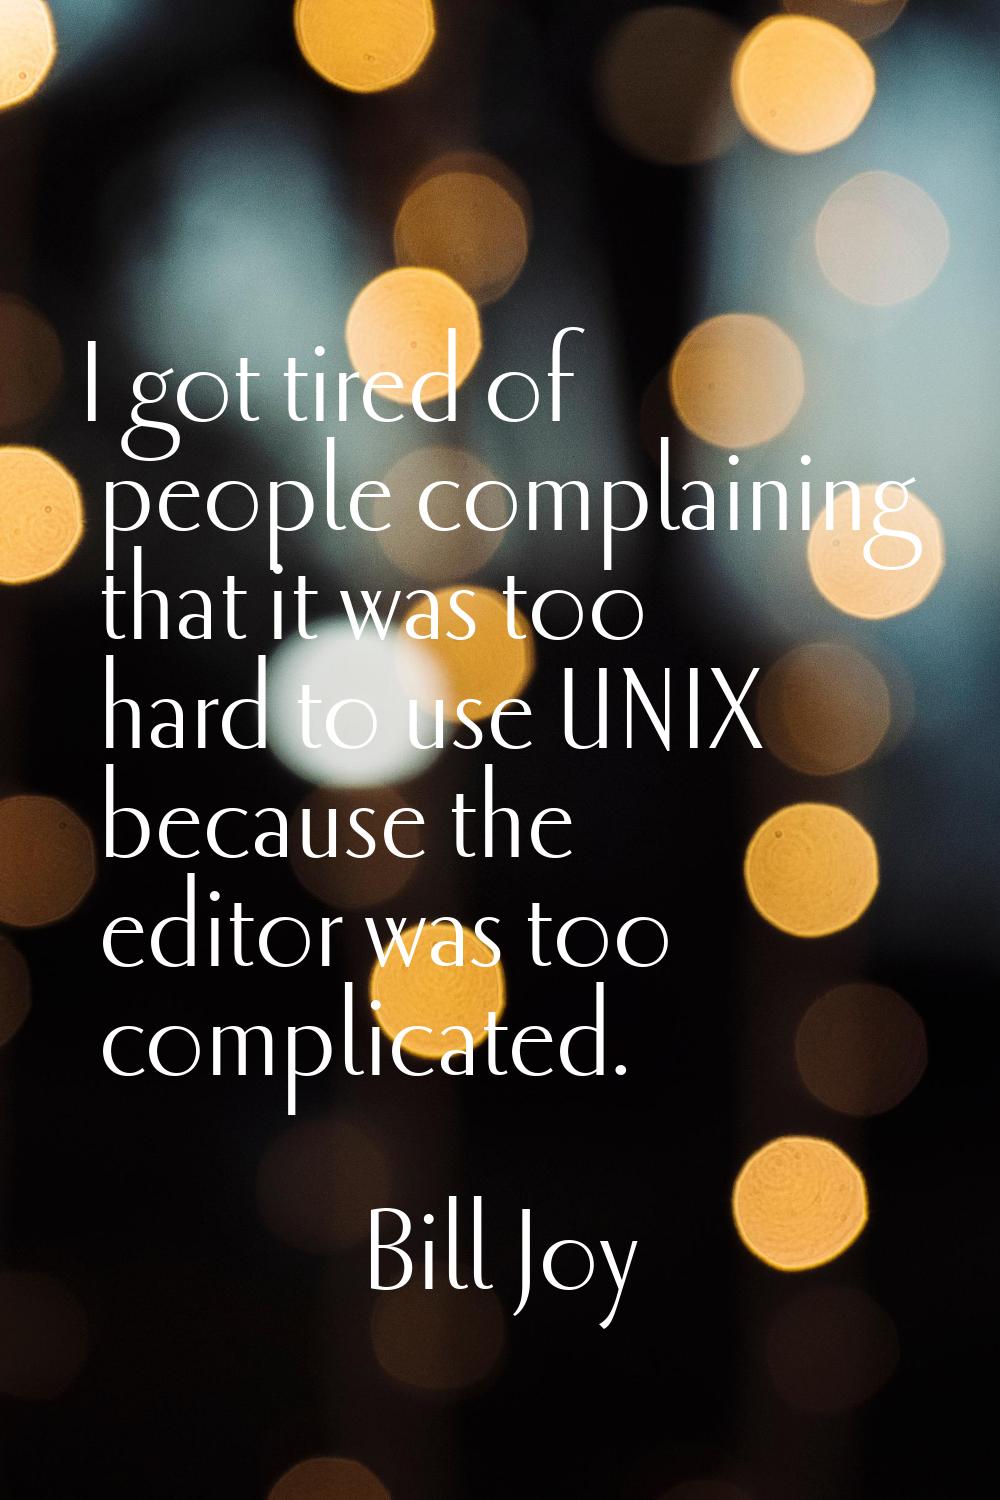 I got tired of people complaining that it was too hard to use UNIX because the editor was too compl